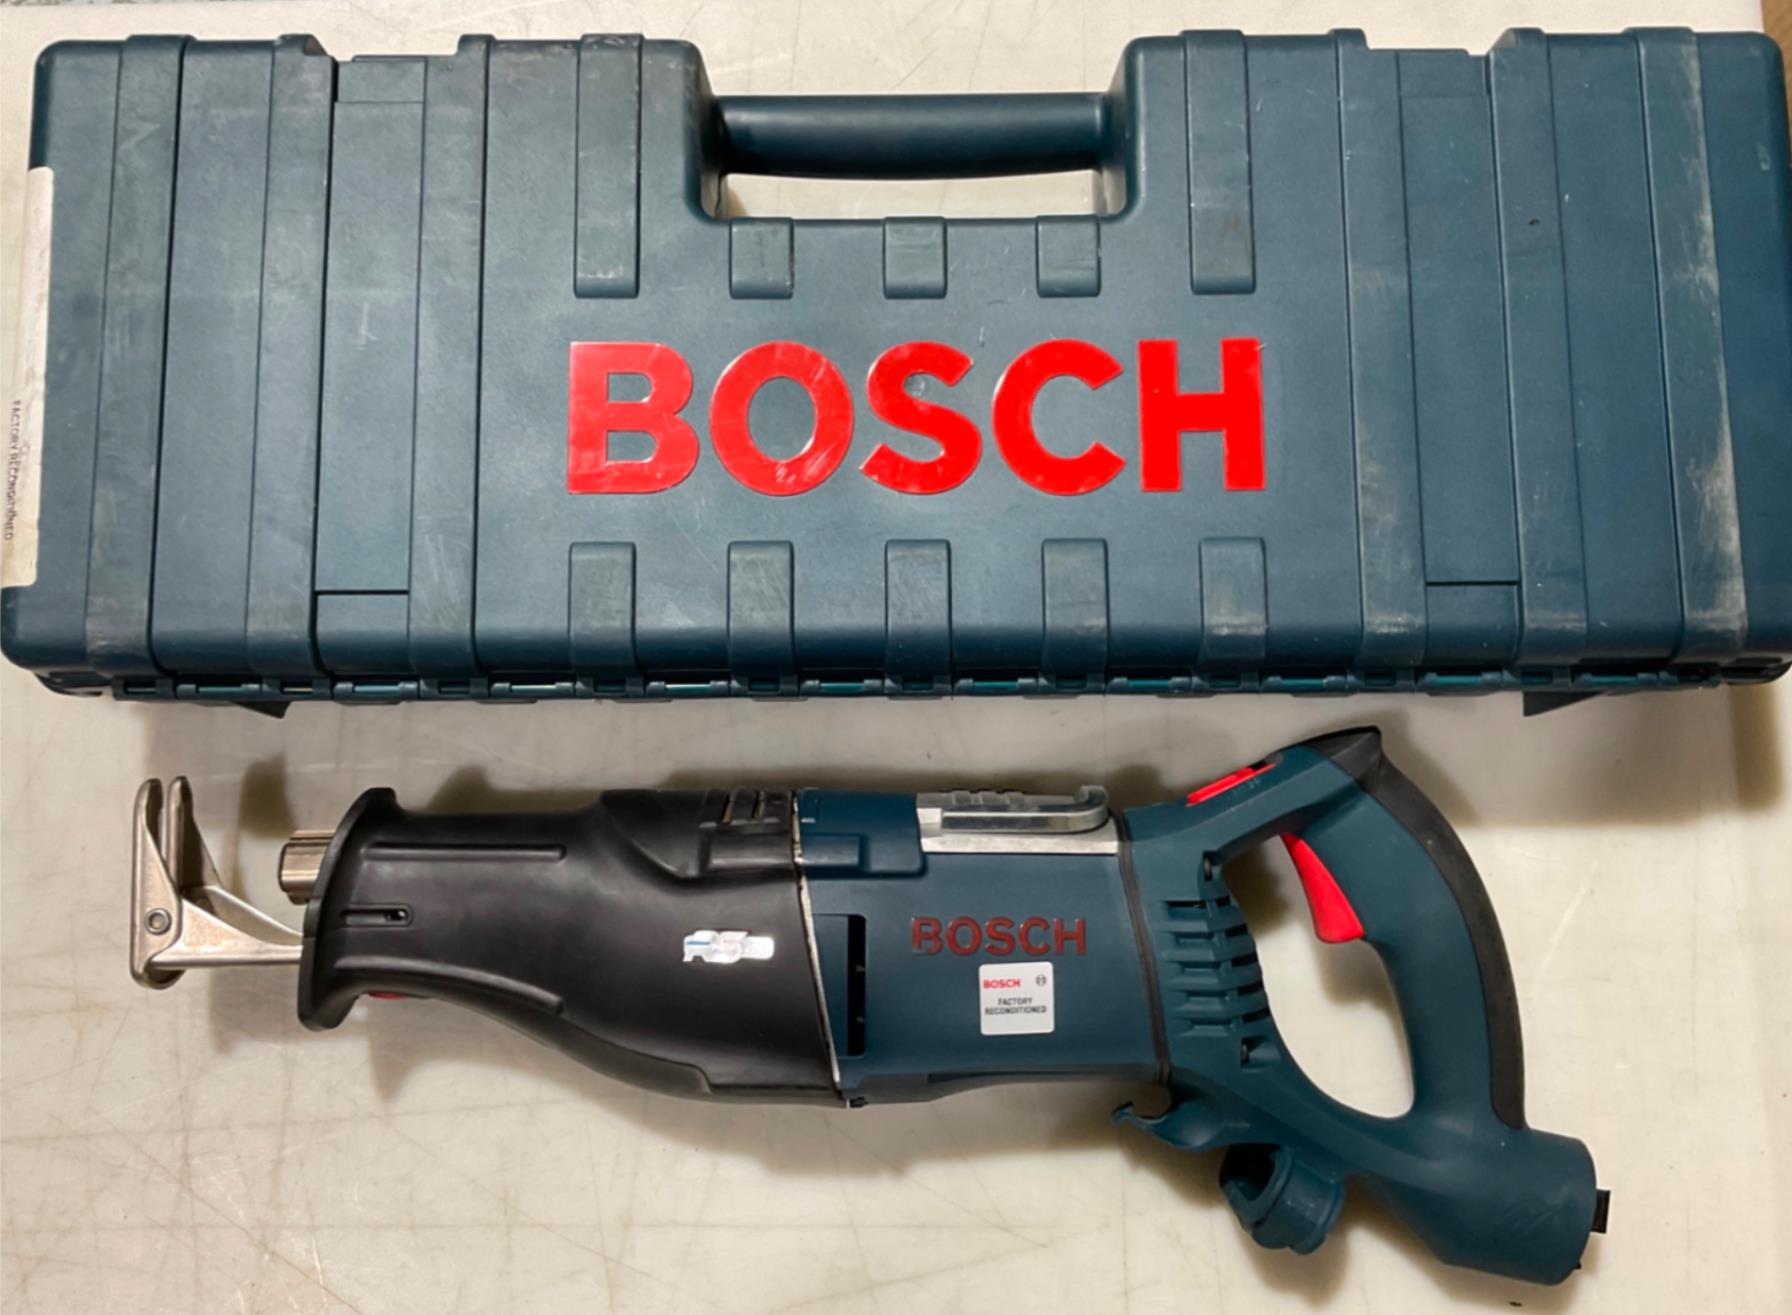 Bosch RS20 13Amp Corded Reciprocating Saw #15